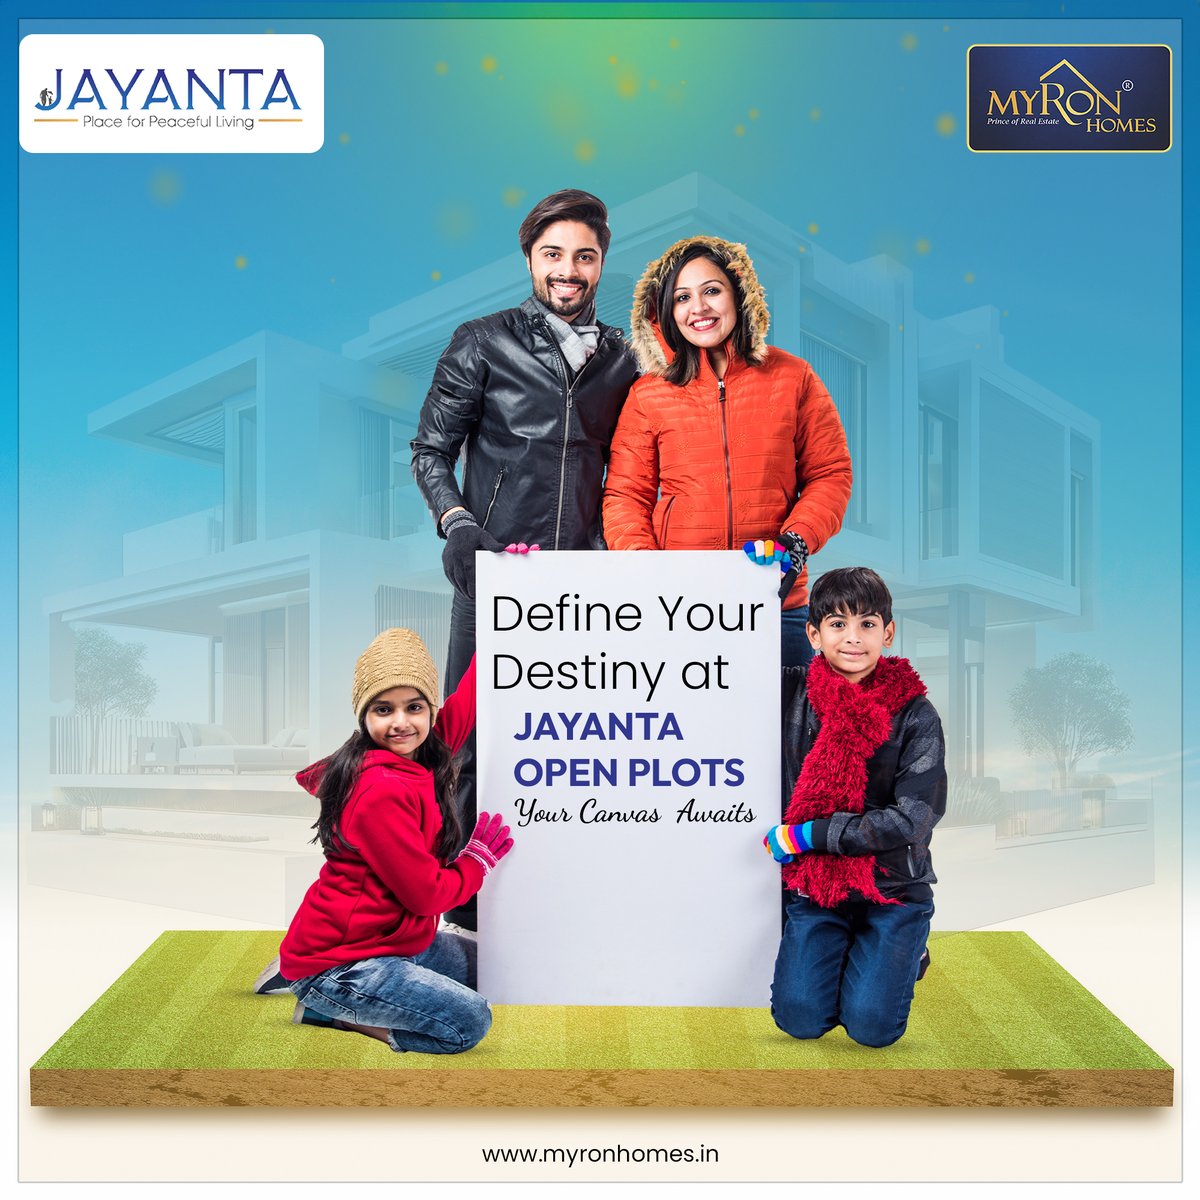 Define your destiny, embrace your future at Jayanta. Our open plots provide the space for you to write your own story and build the life you desire.

#jayanta #Myronhomes #myronhomesinfra #jayantaopenplots #PoweringTheFuture #HighReturns #plotsforsale #Tirupati #realestatelife